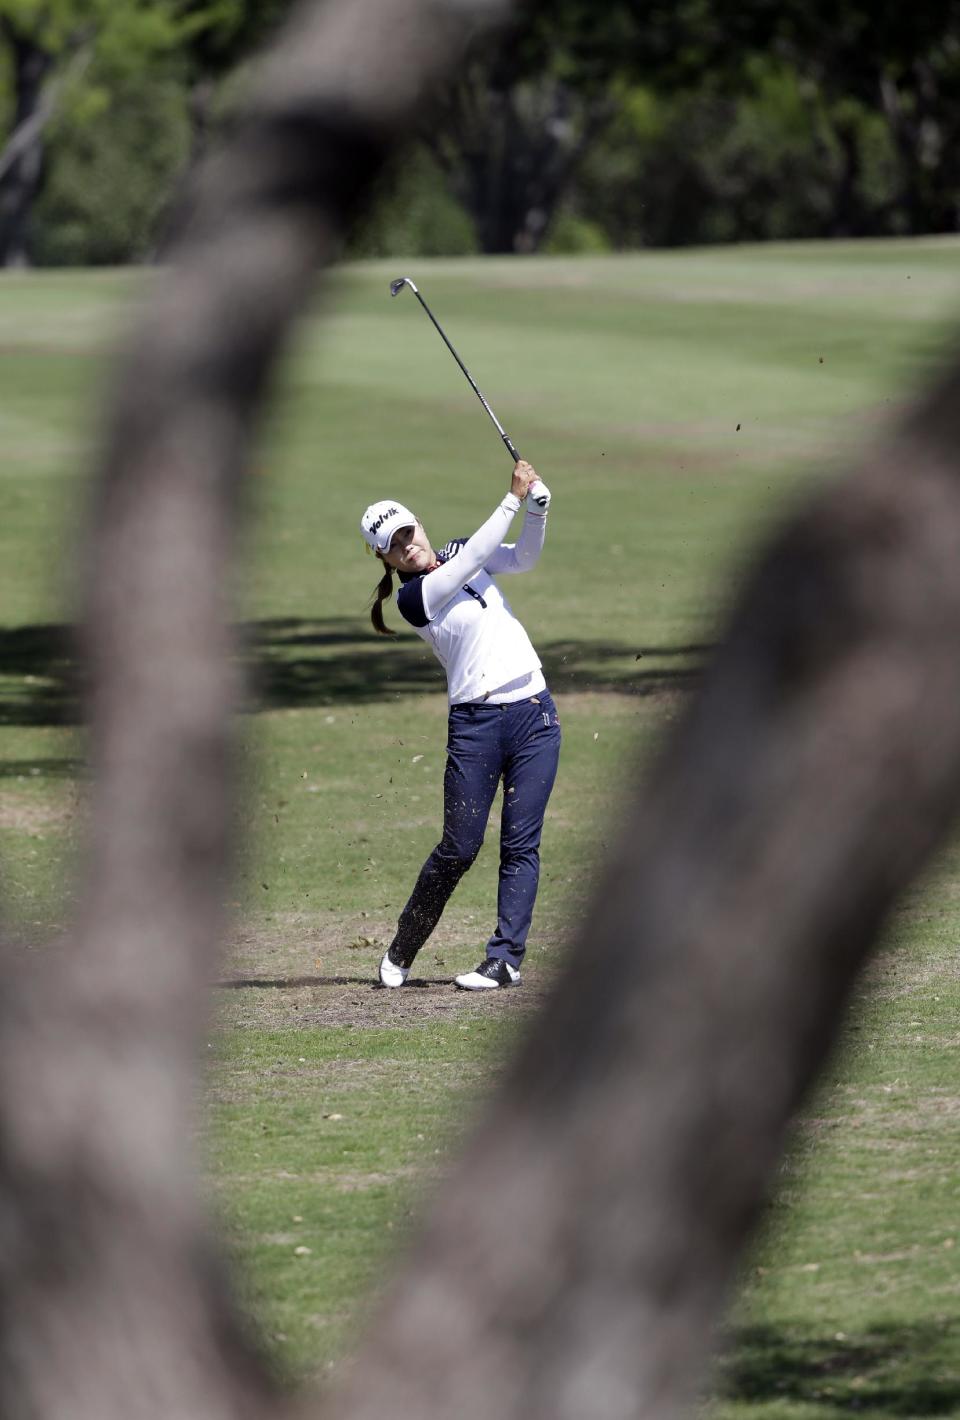 Meena Lee, of South Korea, watches her approach shot to the first green during the second round of the North Texas LPGA Shootout golf tournament at the Las Colinas Country Club in Irving, Texas, Friday, May 2, 2014. (AP Photo/LM Otero)